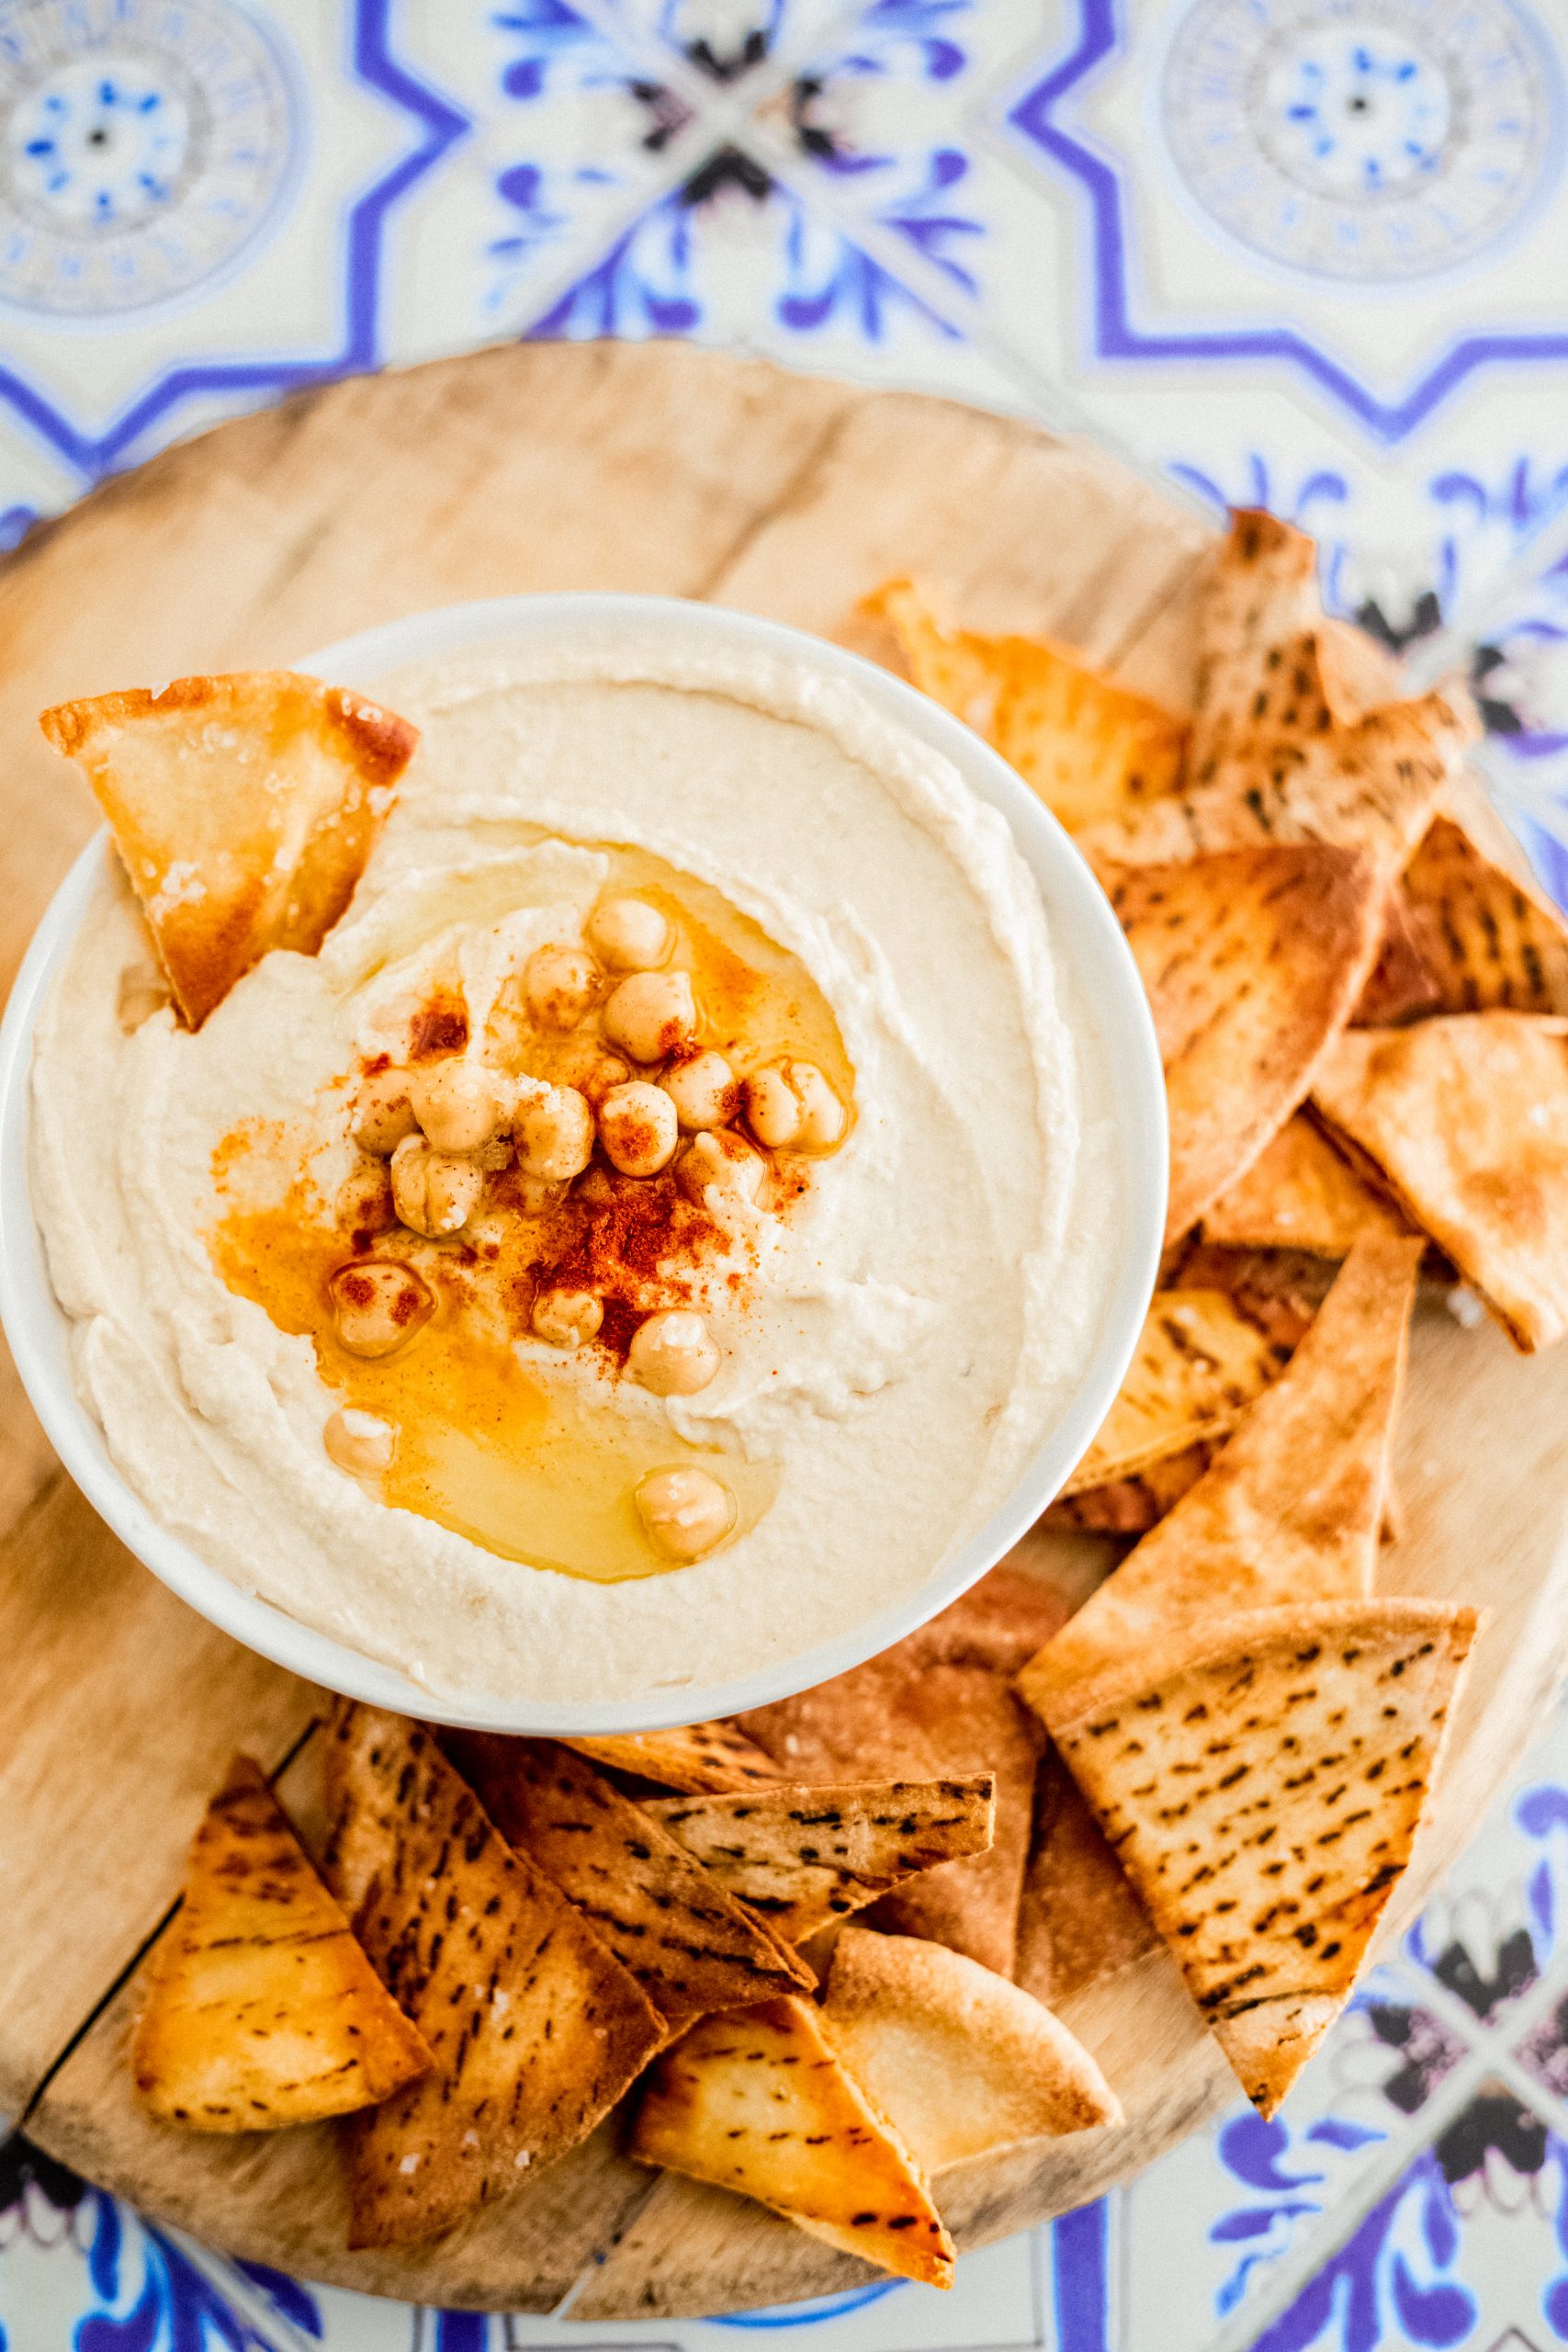 A white bowl of hummus with oli and chickpeas ontop. The bowl on a wooden circular board ontop of a blue tiled backdrop. There are pita chips surrounding the bowl.